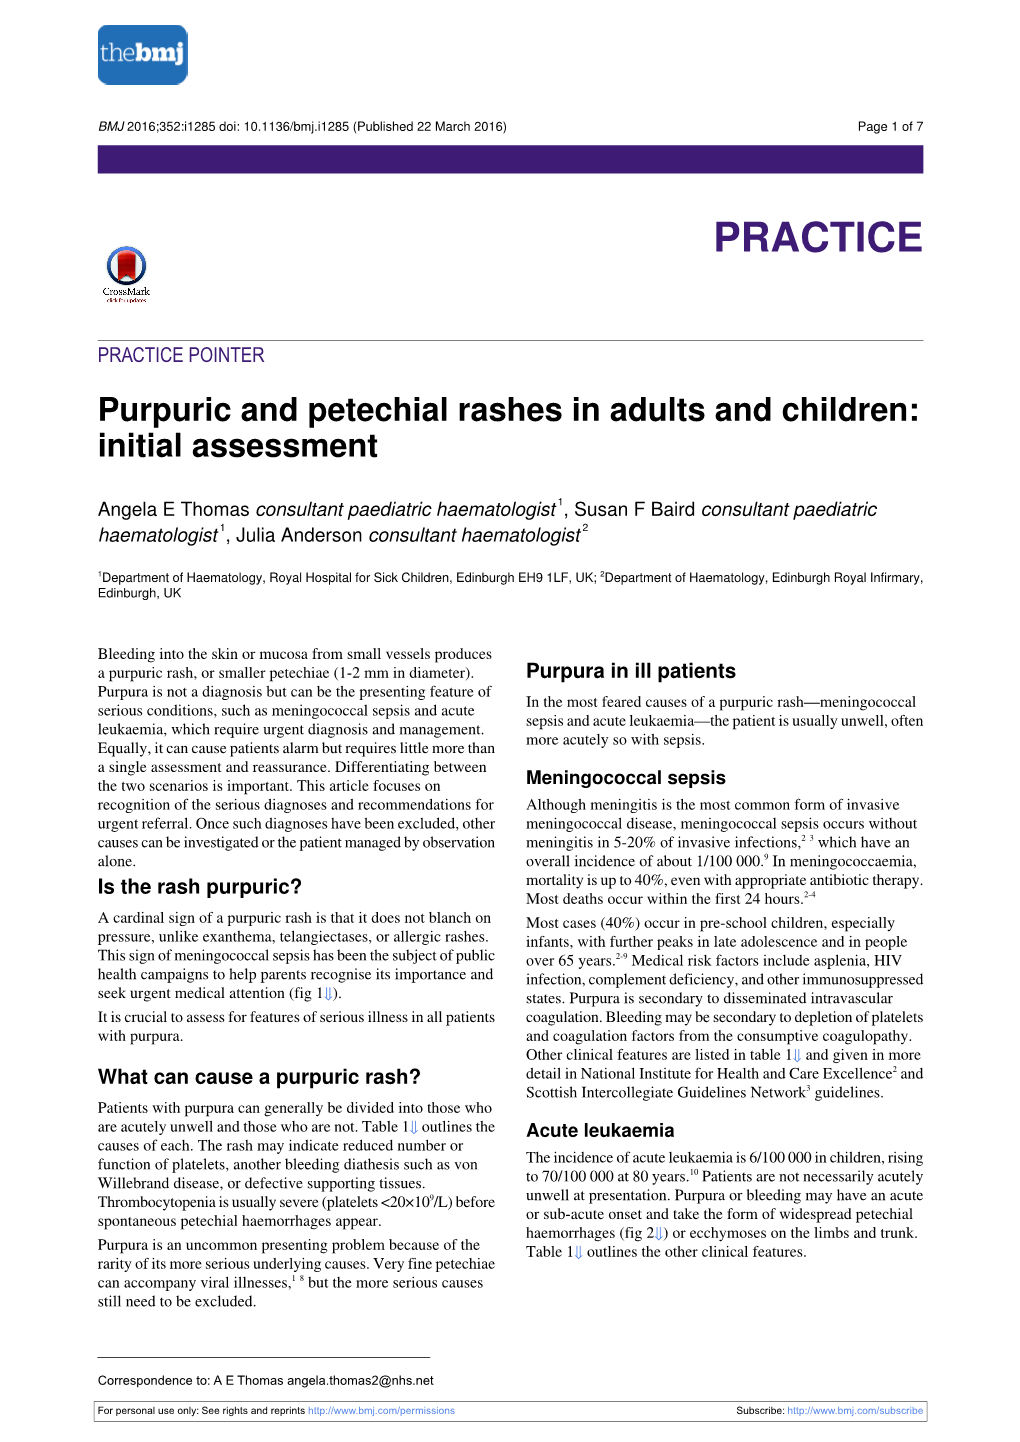 Purpuric and Petechial Rashes in Adults and Children: Initial Assessment